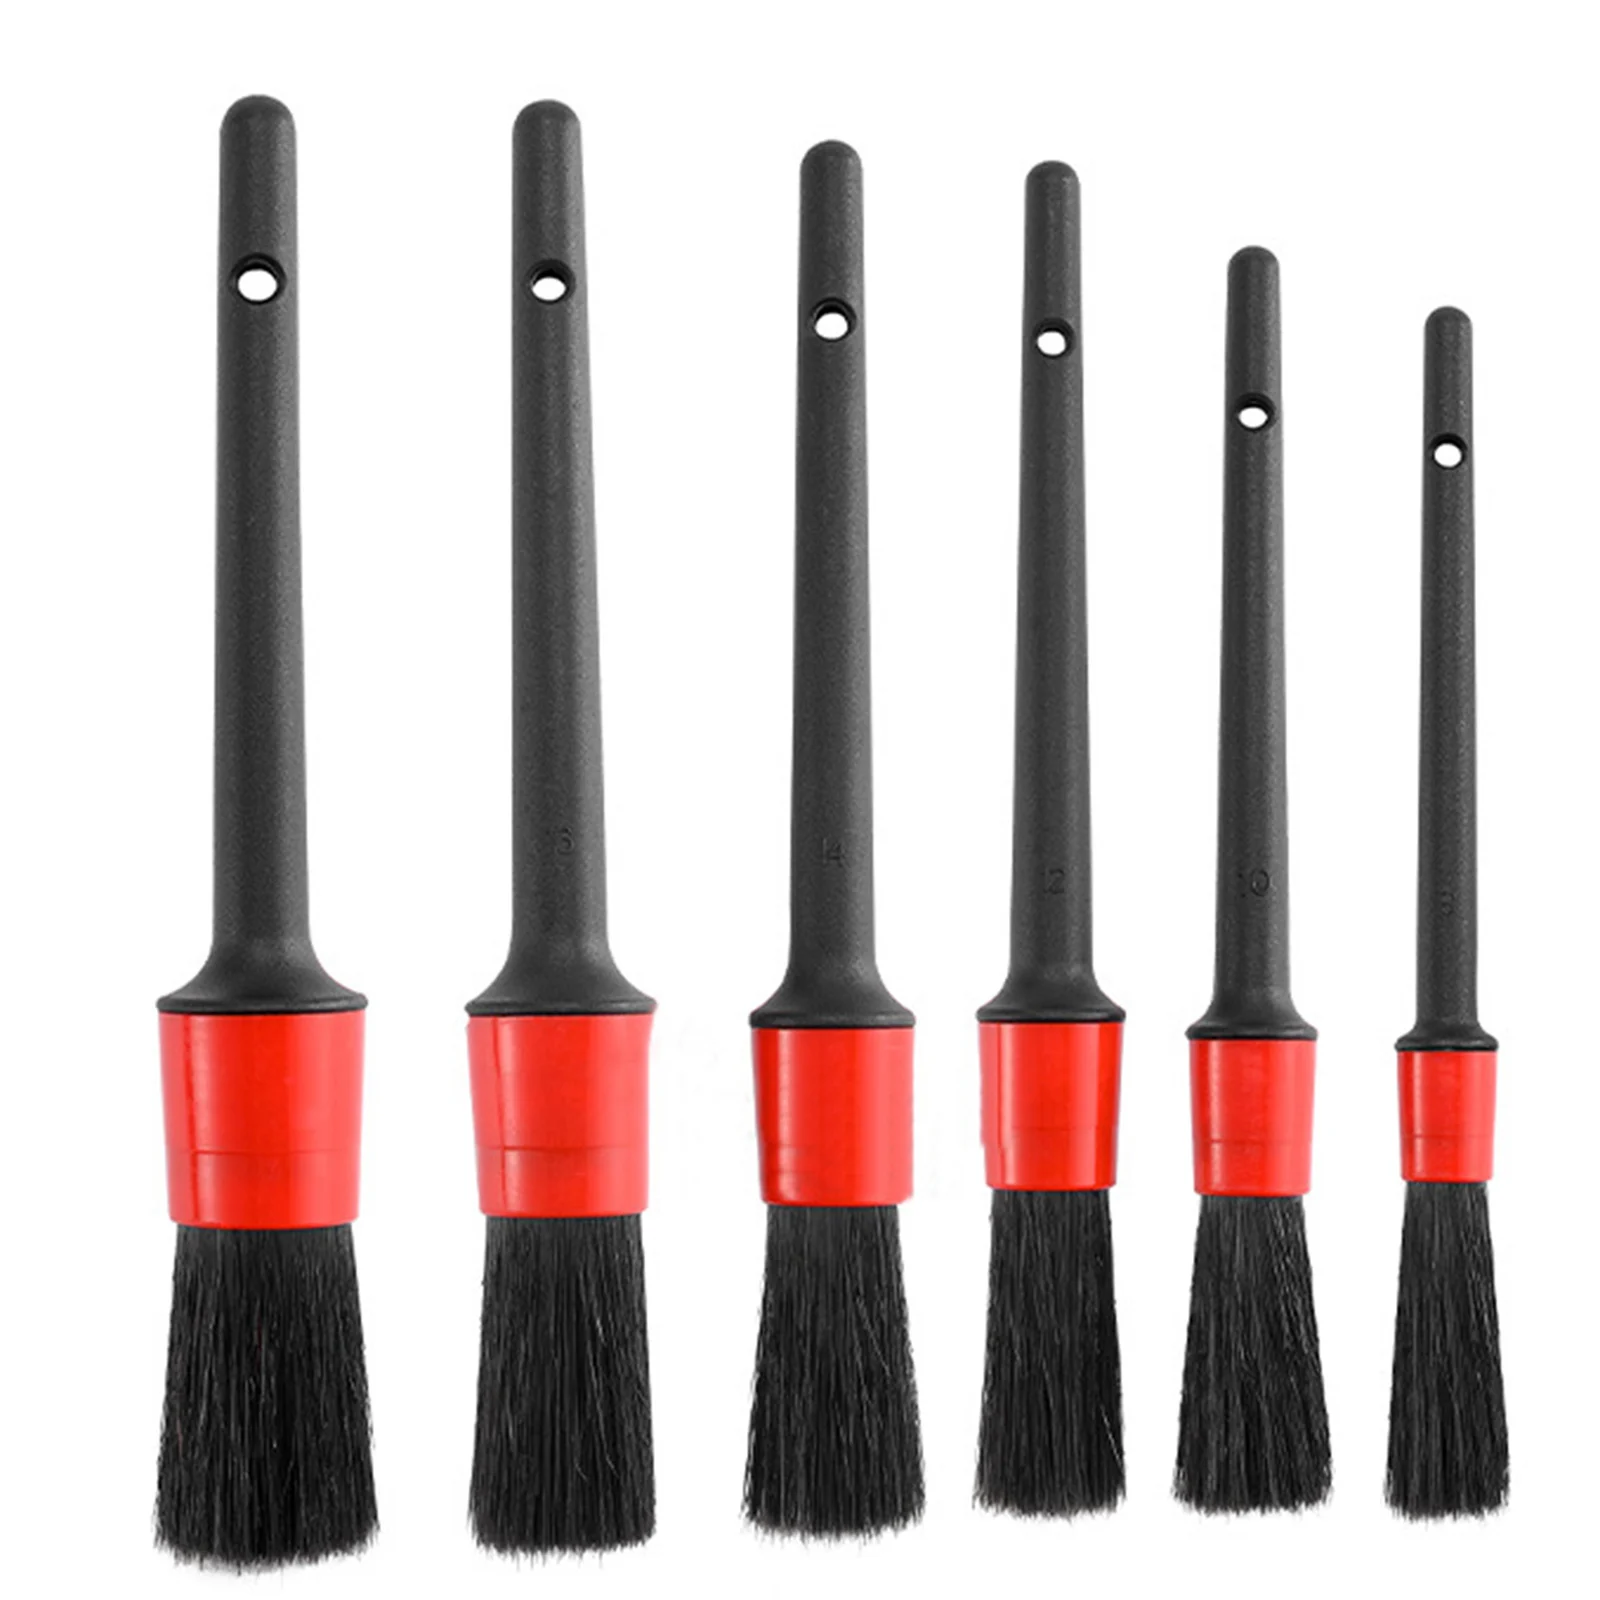 

Car Detailing Brush Set 6pcs Natural Boar Hair Automobile Detail Brushes For Cleaning Engine Air Vents Dashboard Black + Red